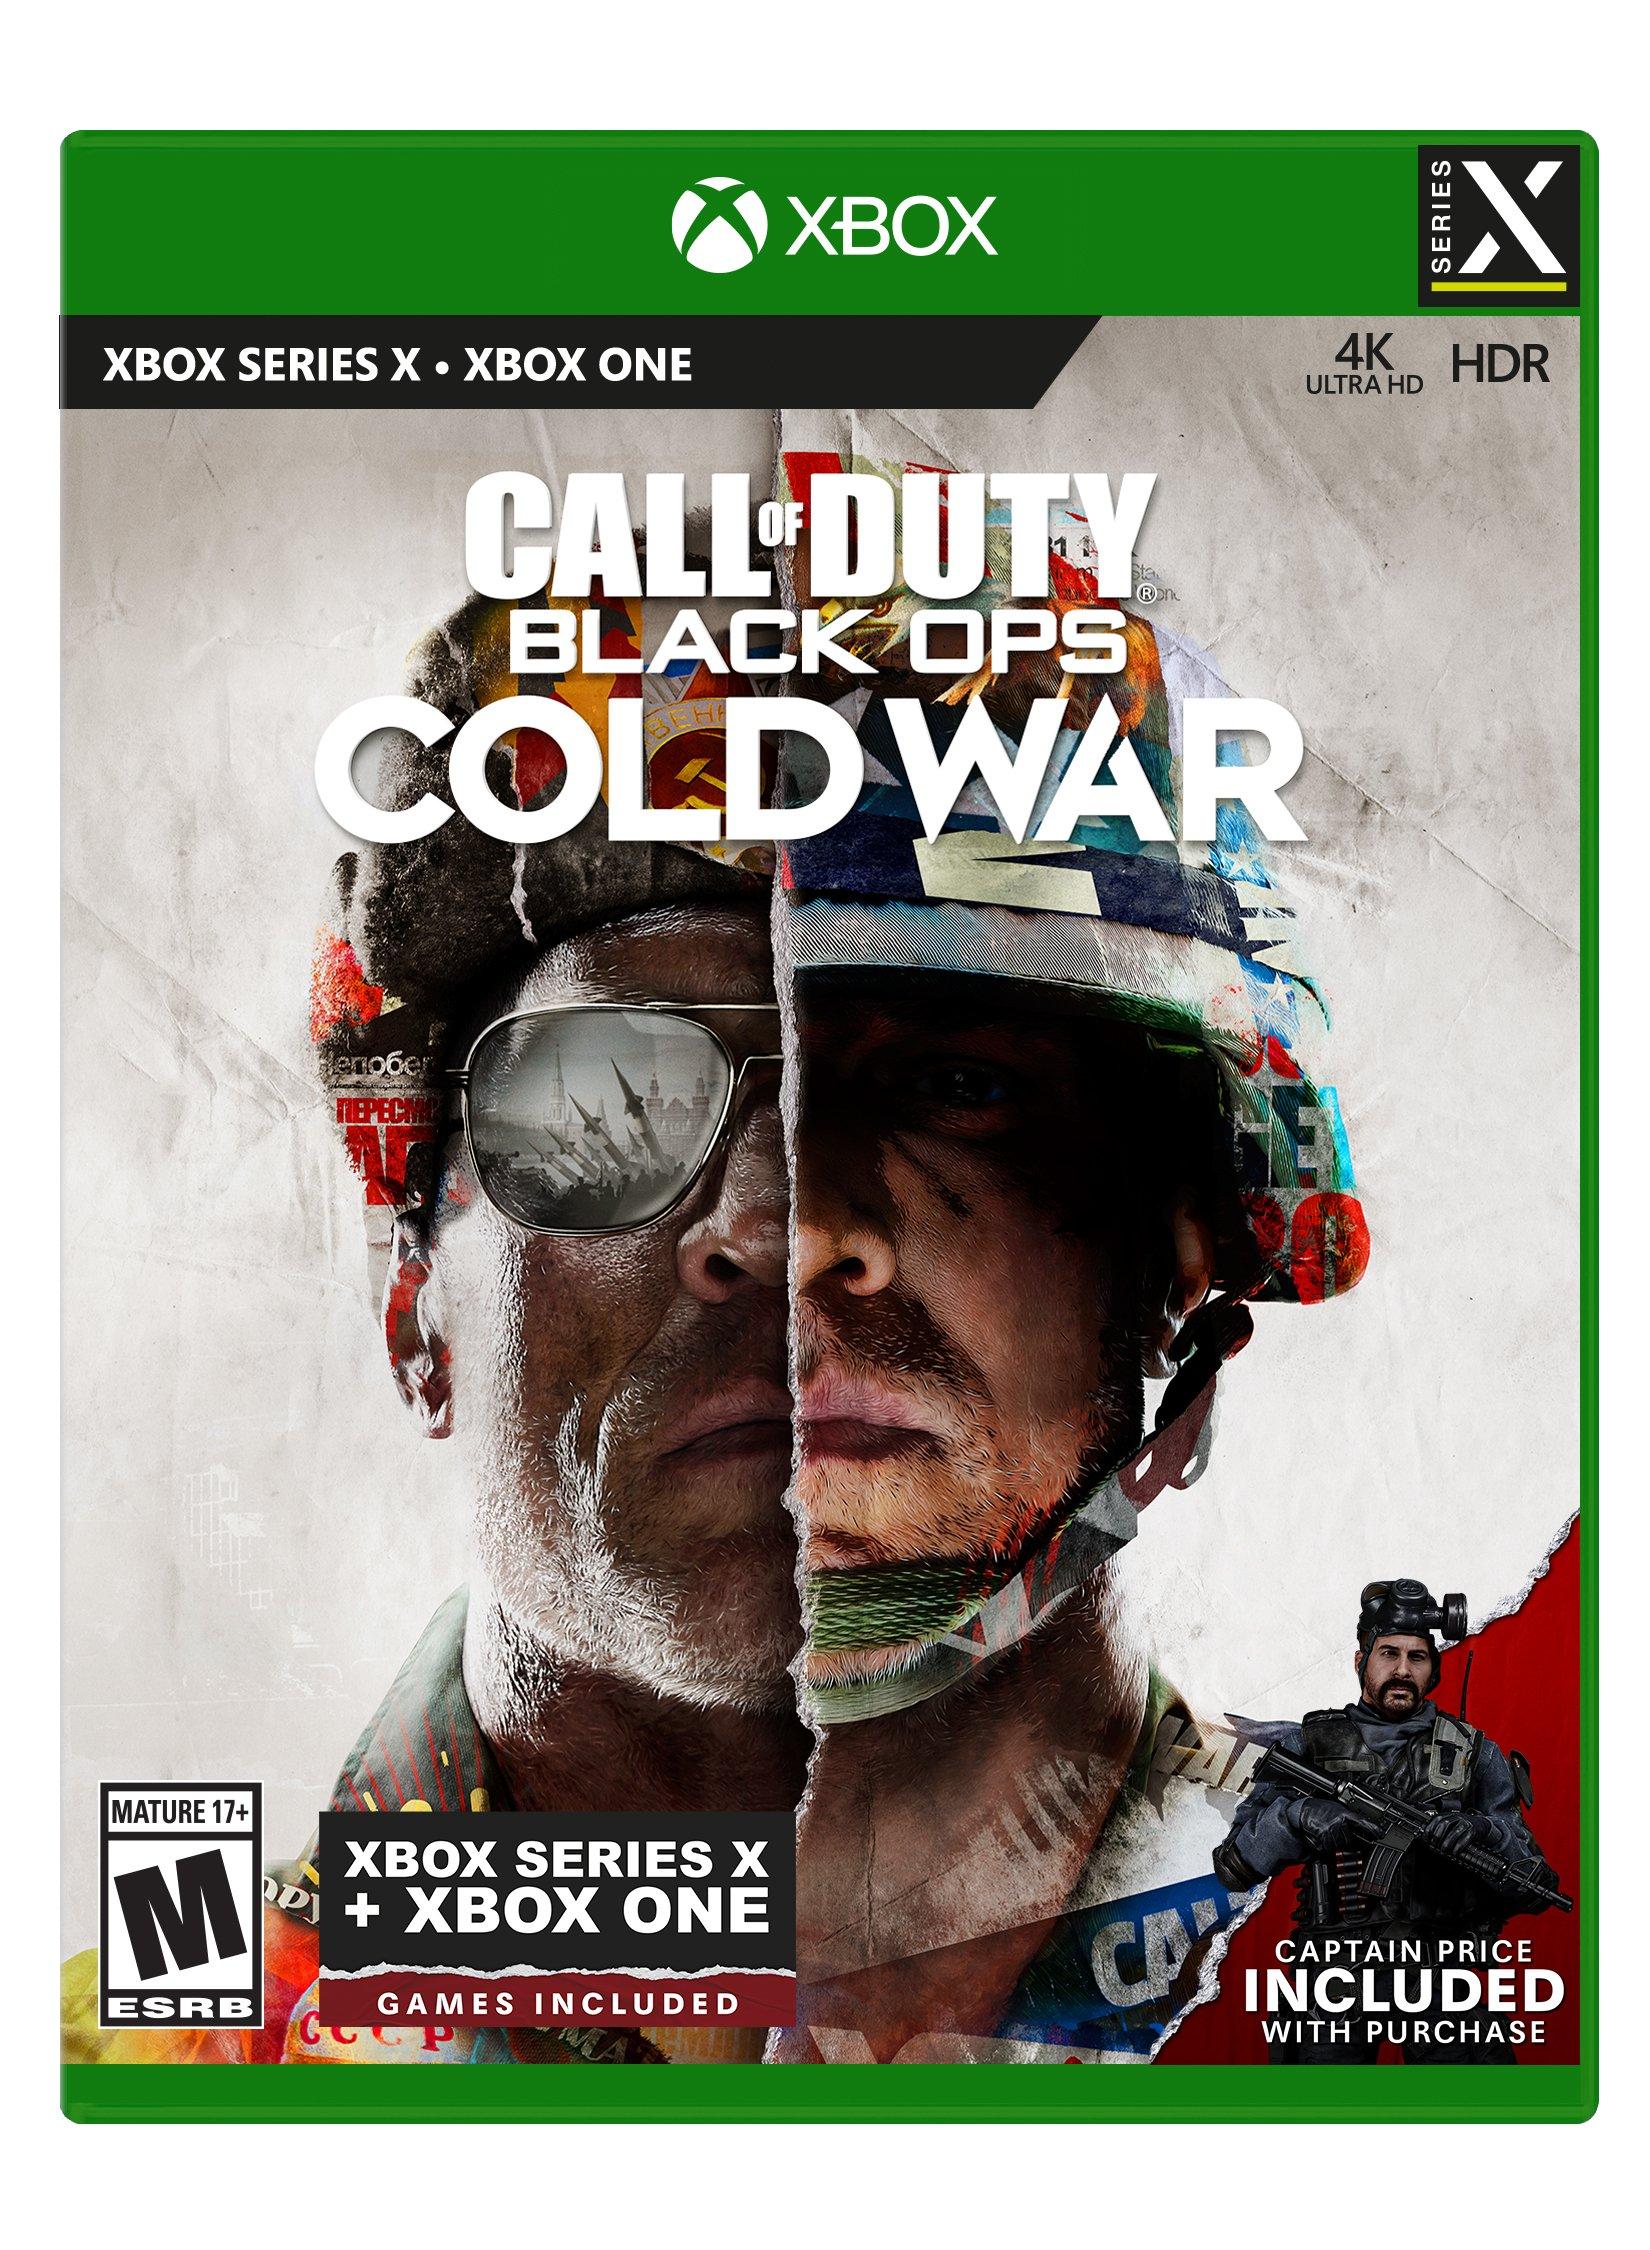 call of duty digital download xbox